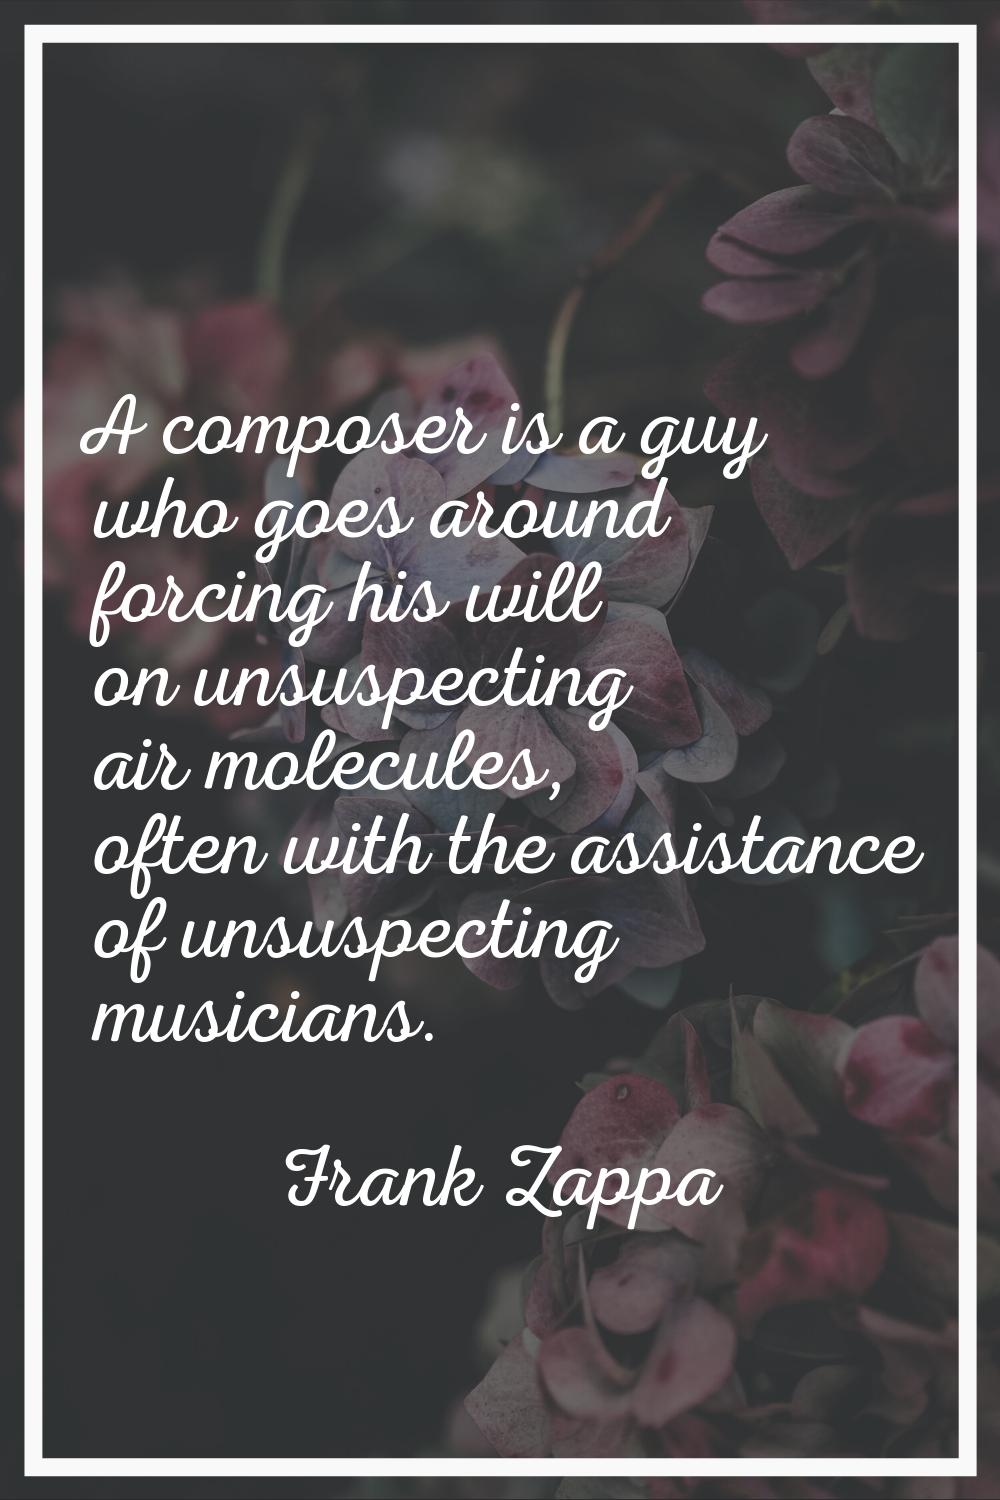 A composer is a guy who goes around forcing his will on unsuspecting air molecules, often with the 